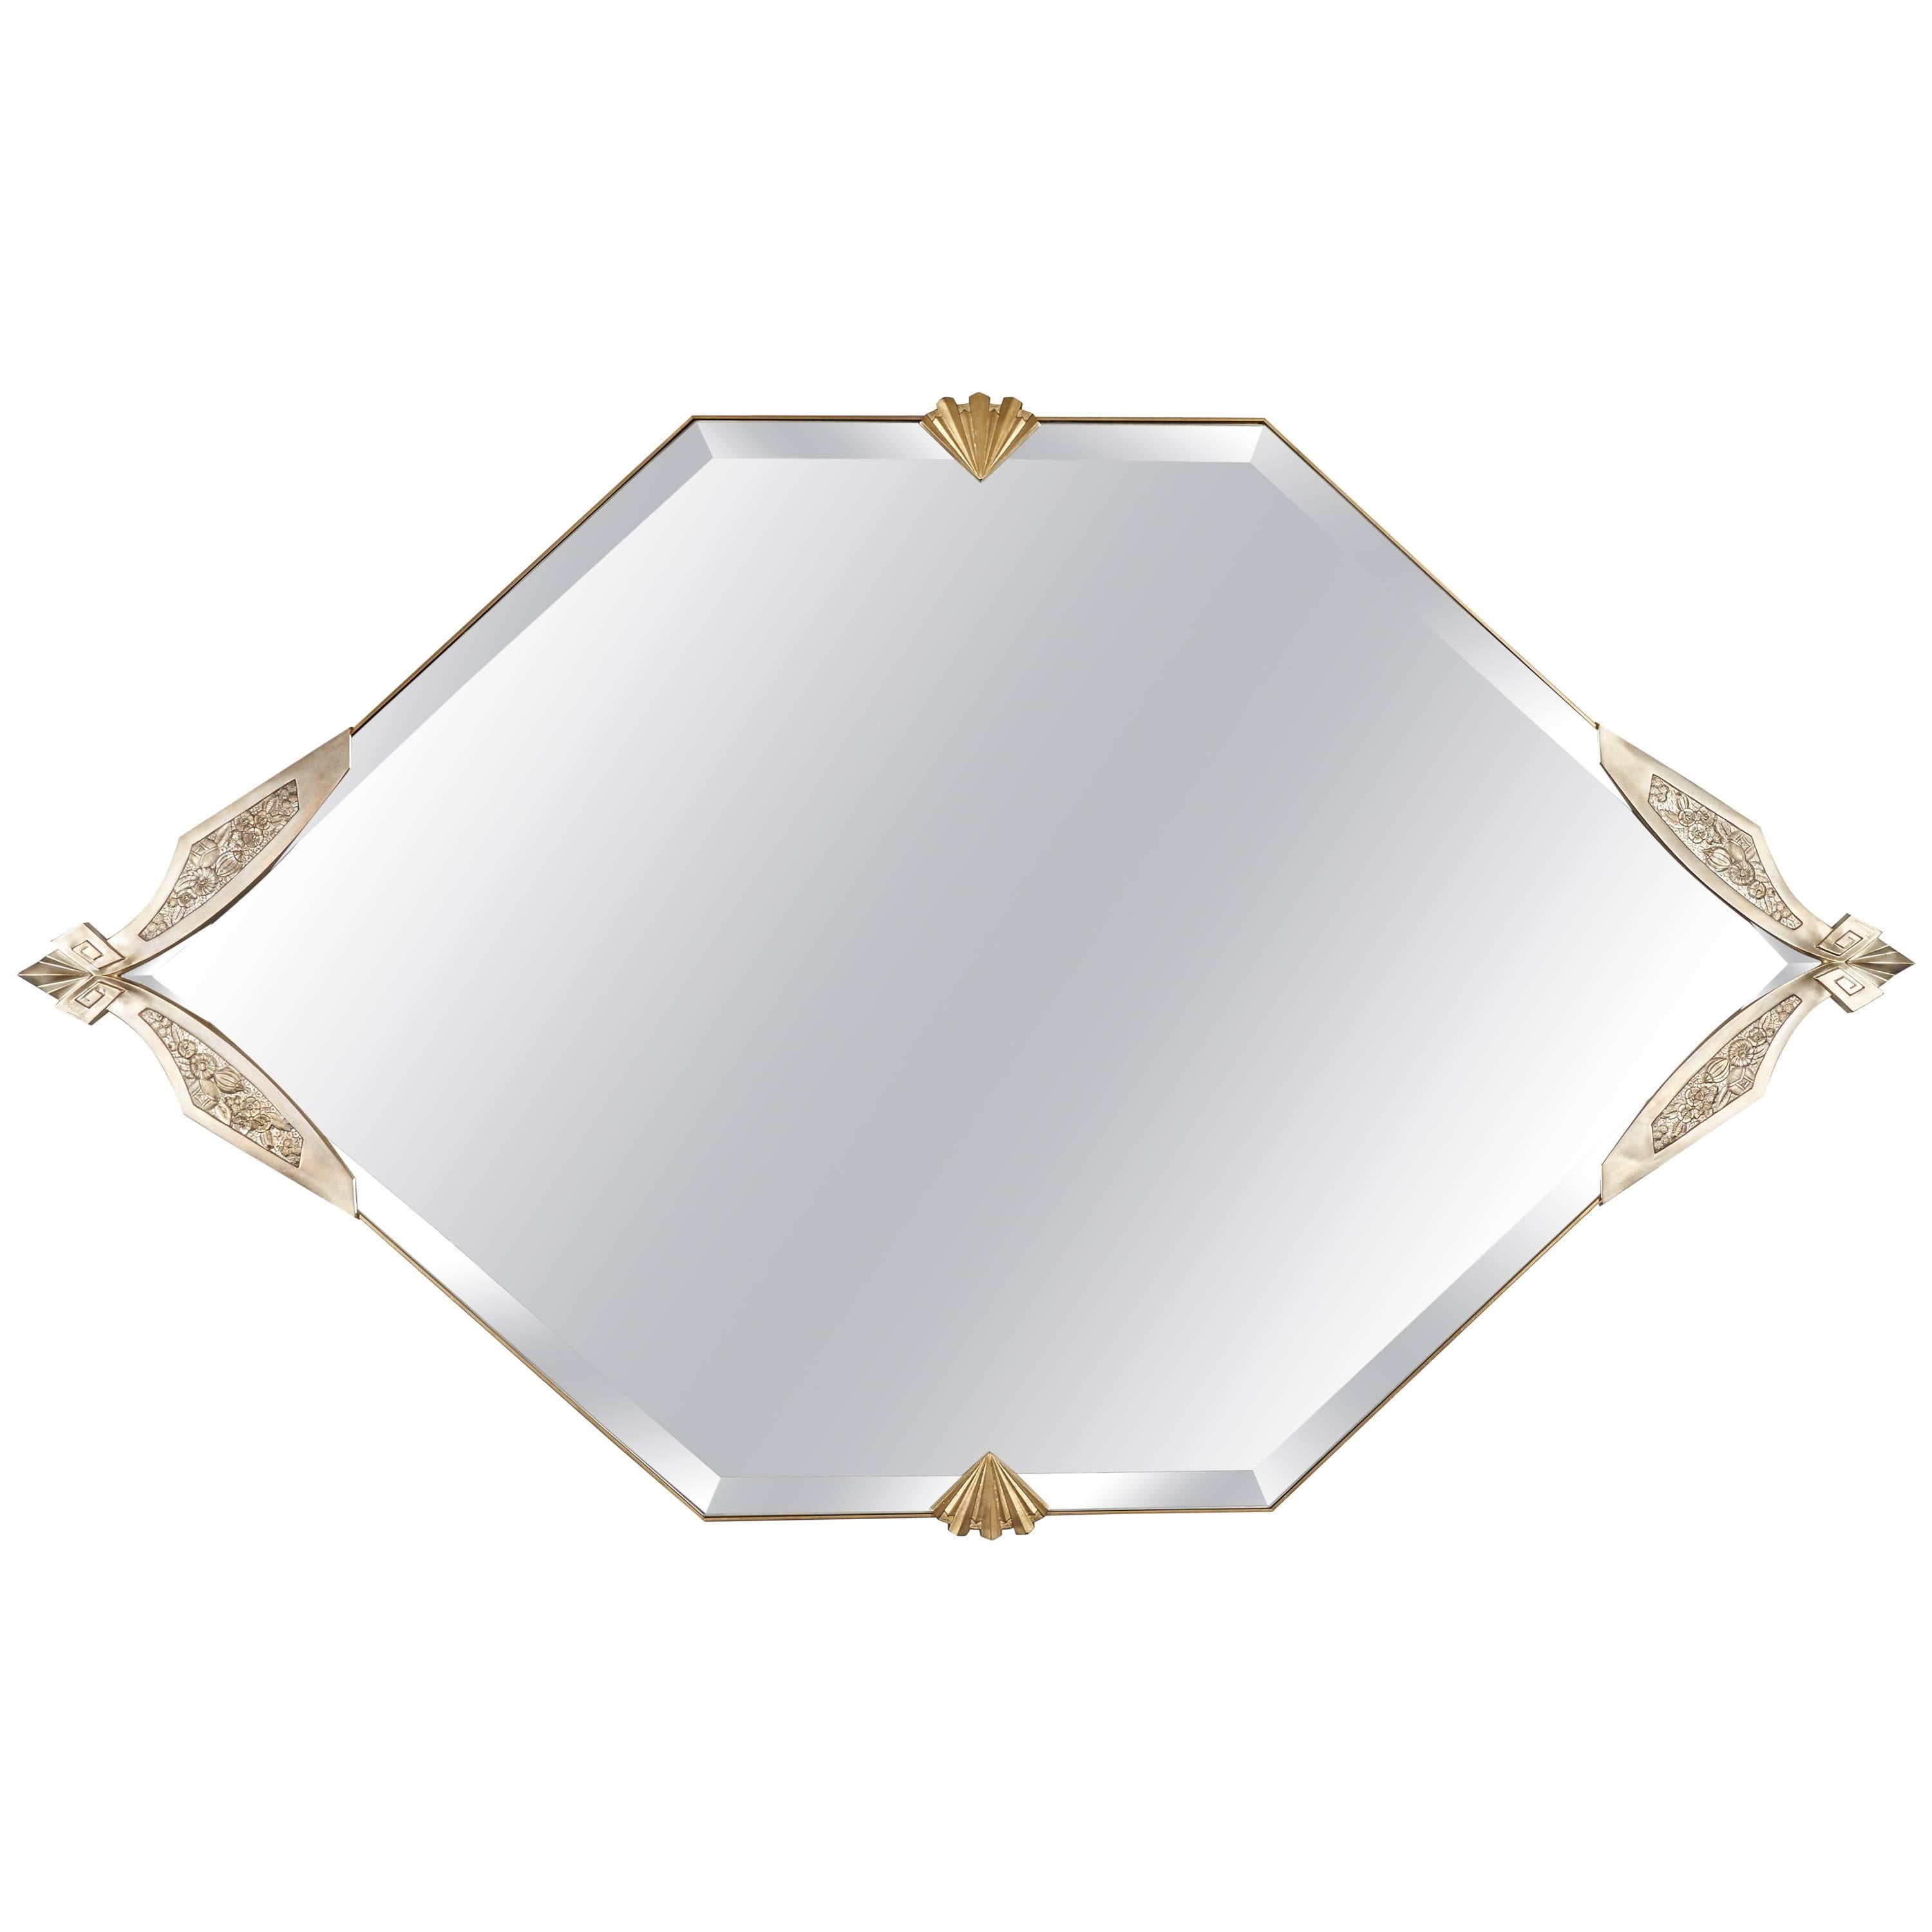 Very Large French Art Deco Diamond Shaped Mirror, White Gold over Bronze Finish